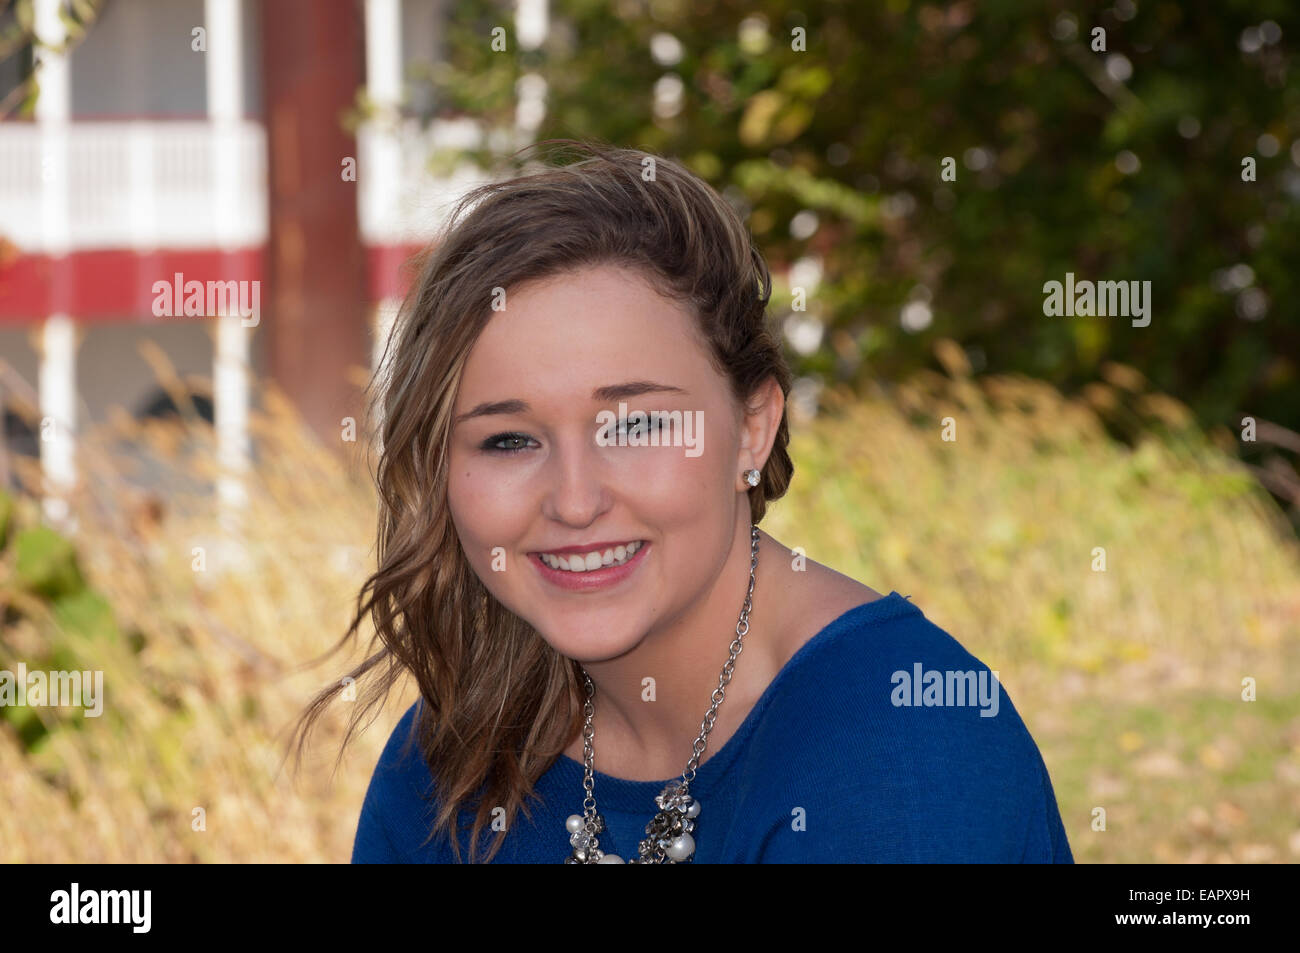 Head and shoulders horizontal portrait of young teen female outdoors smiling Stock Photo